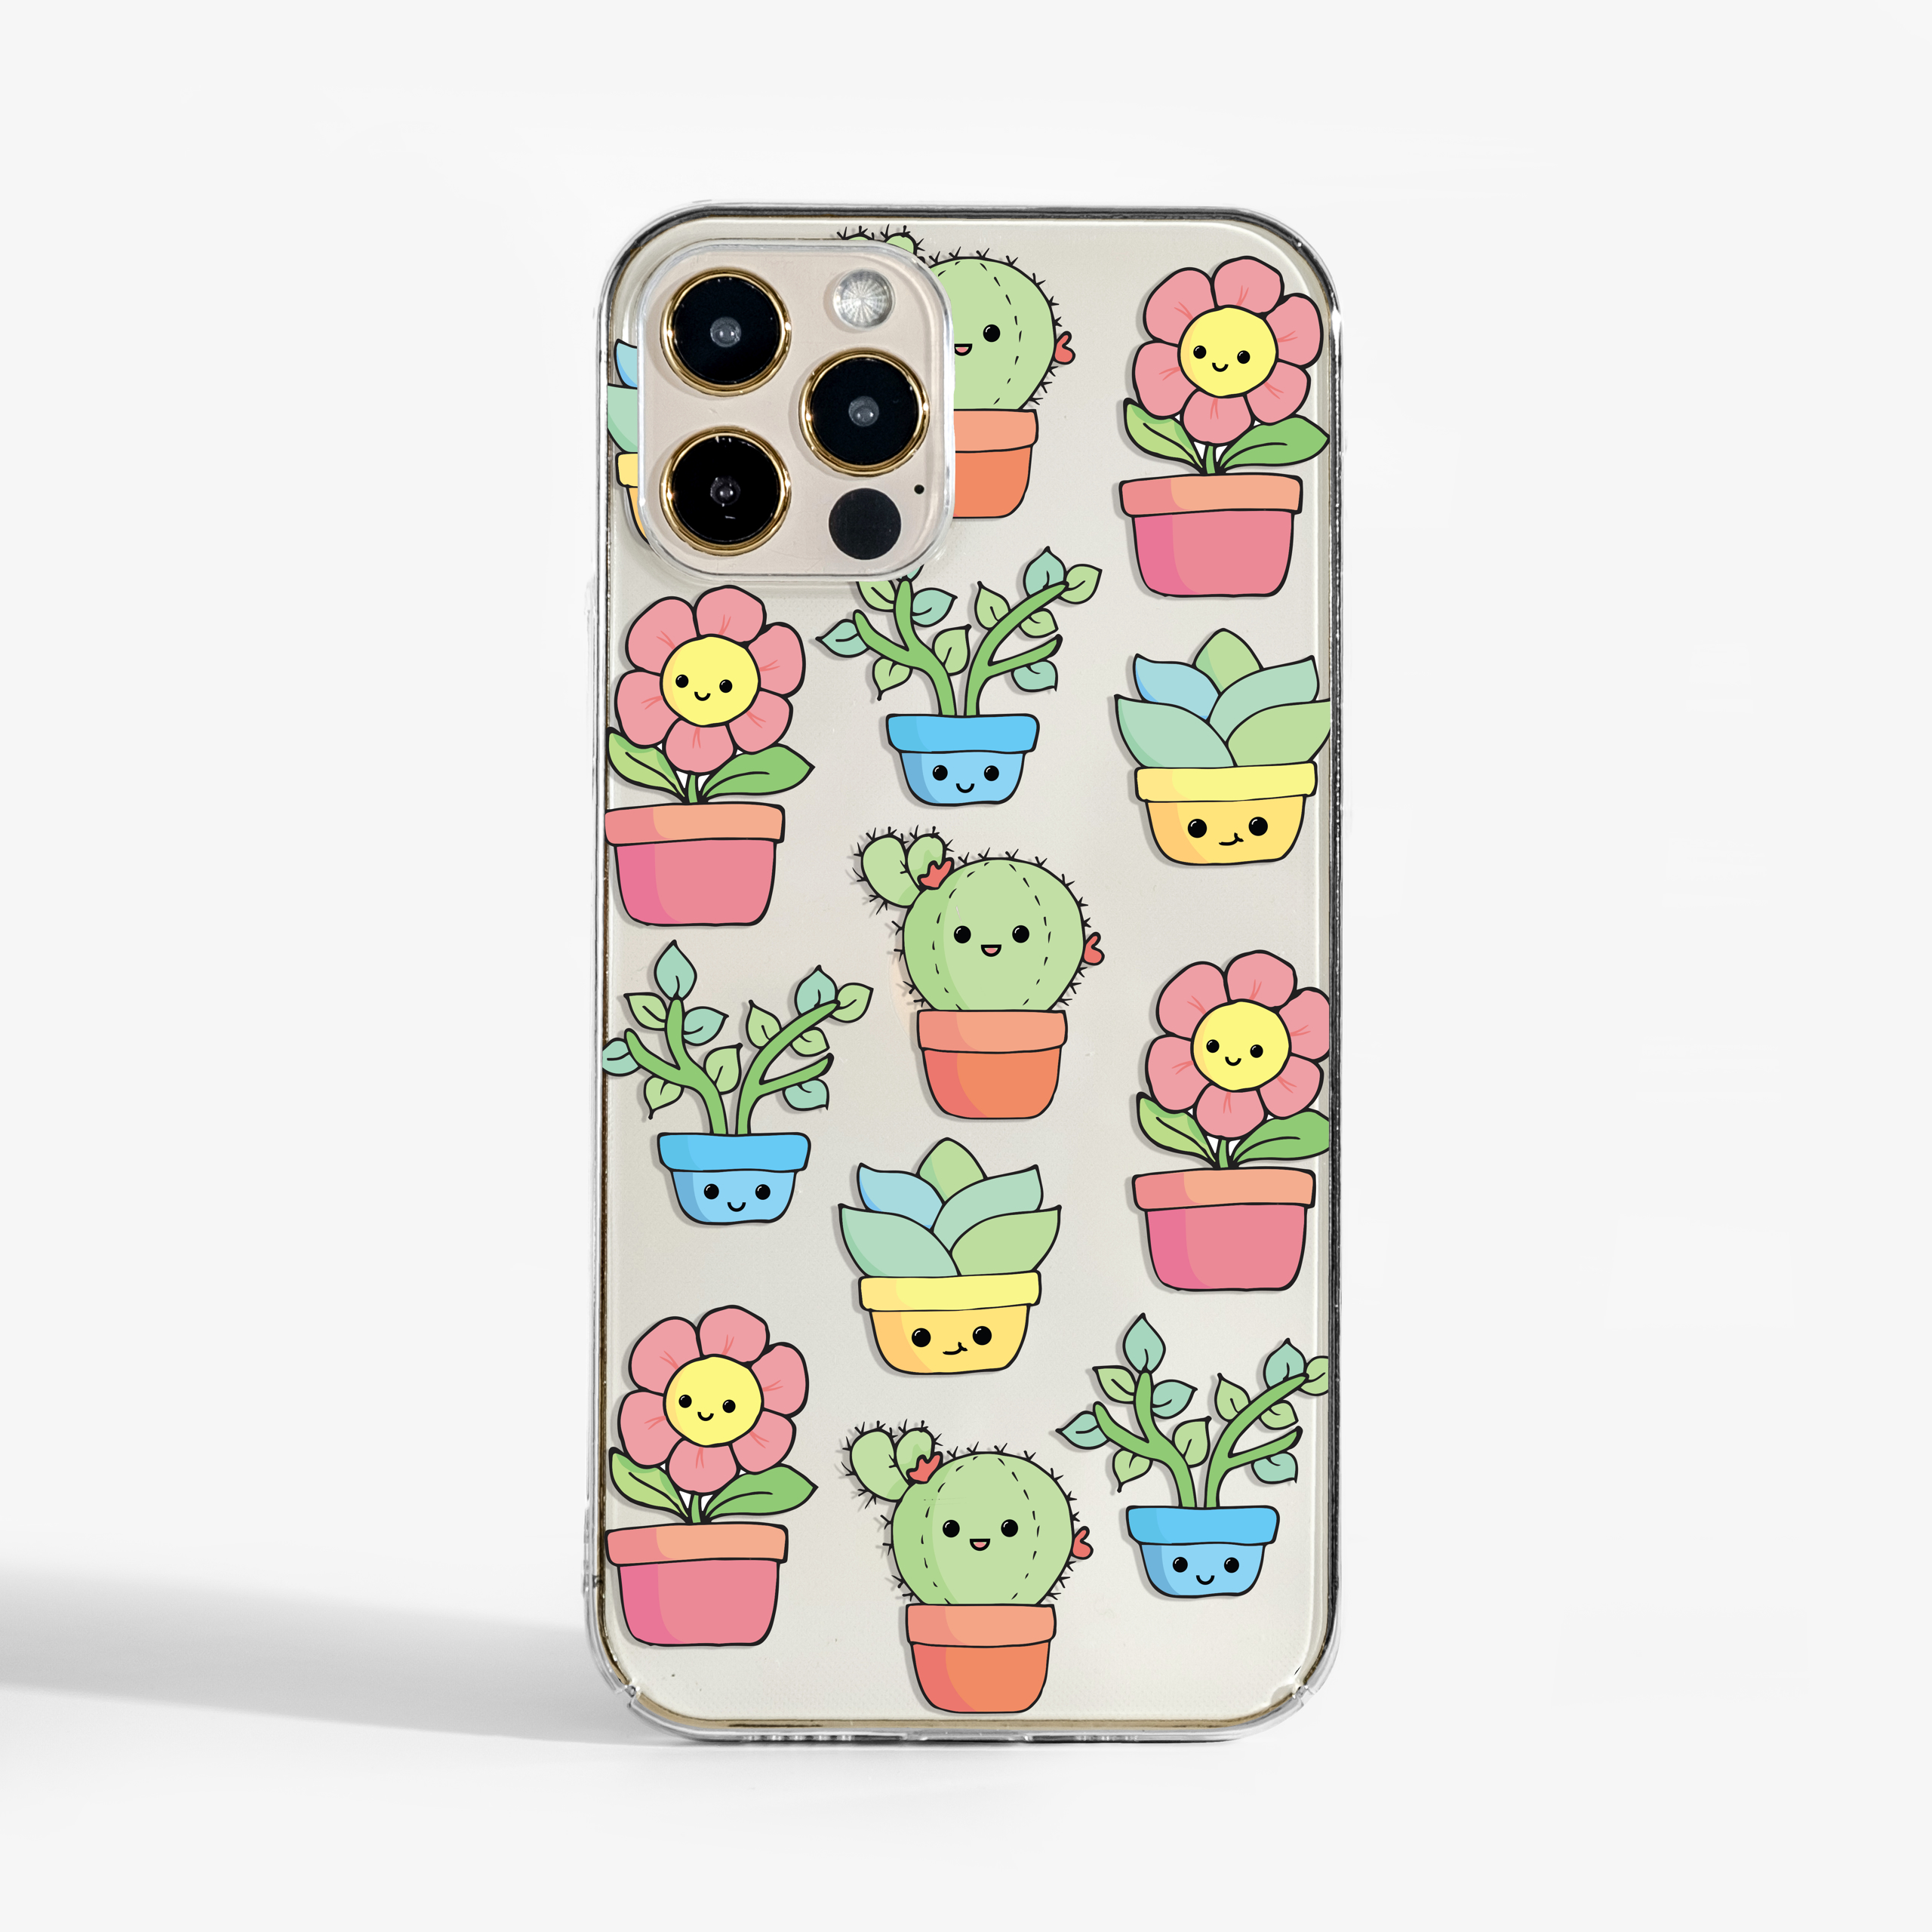 Charming Green Plants Illustration: Cute Phone Case with Soft